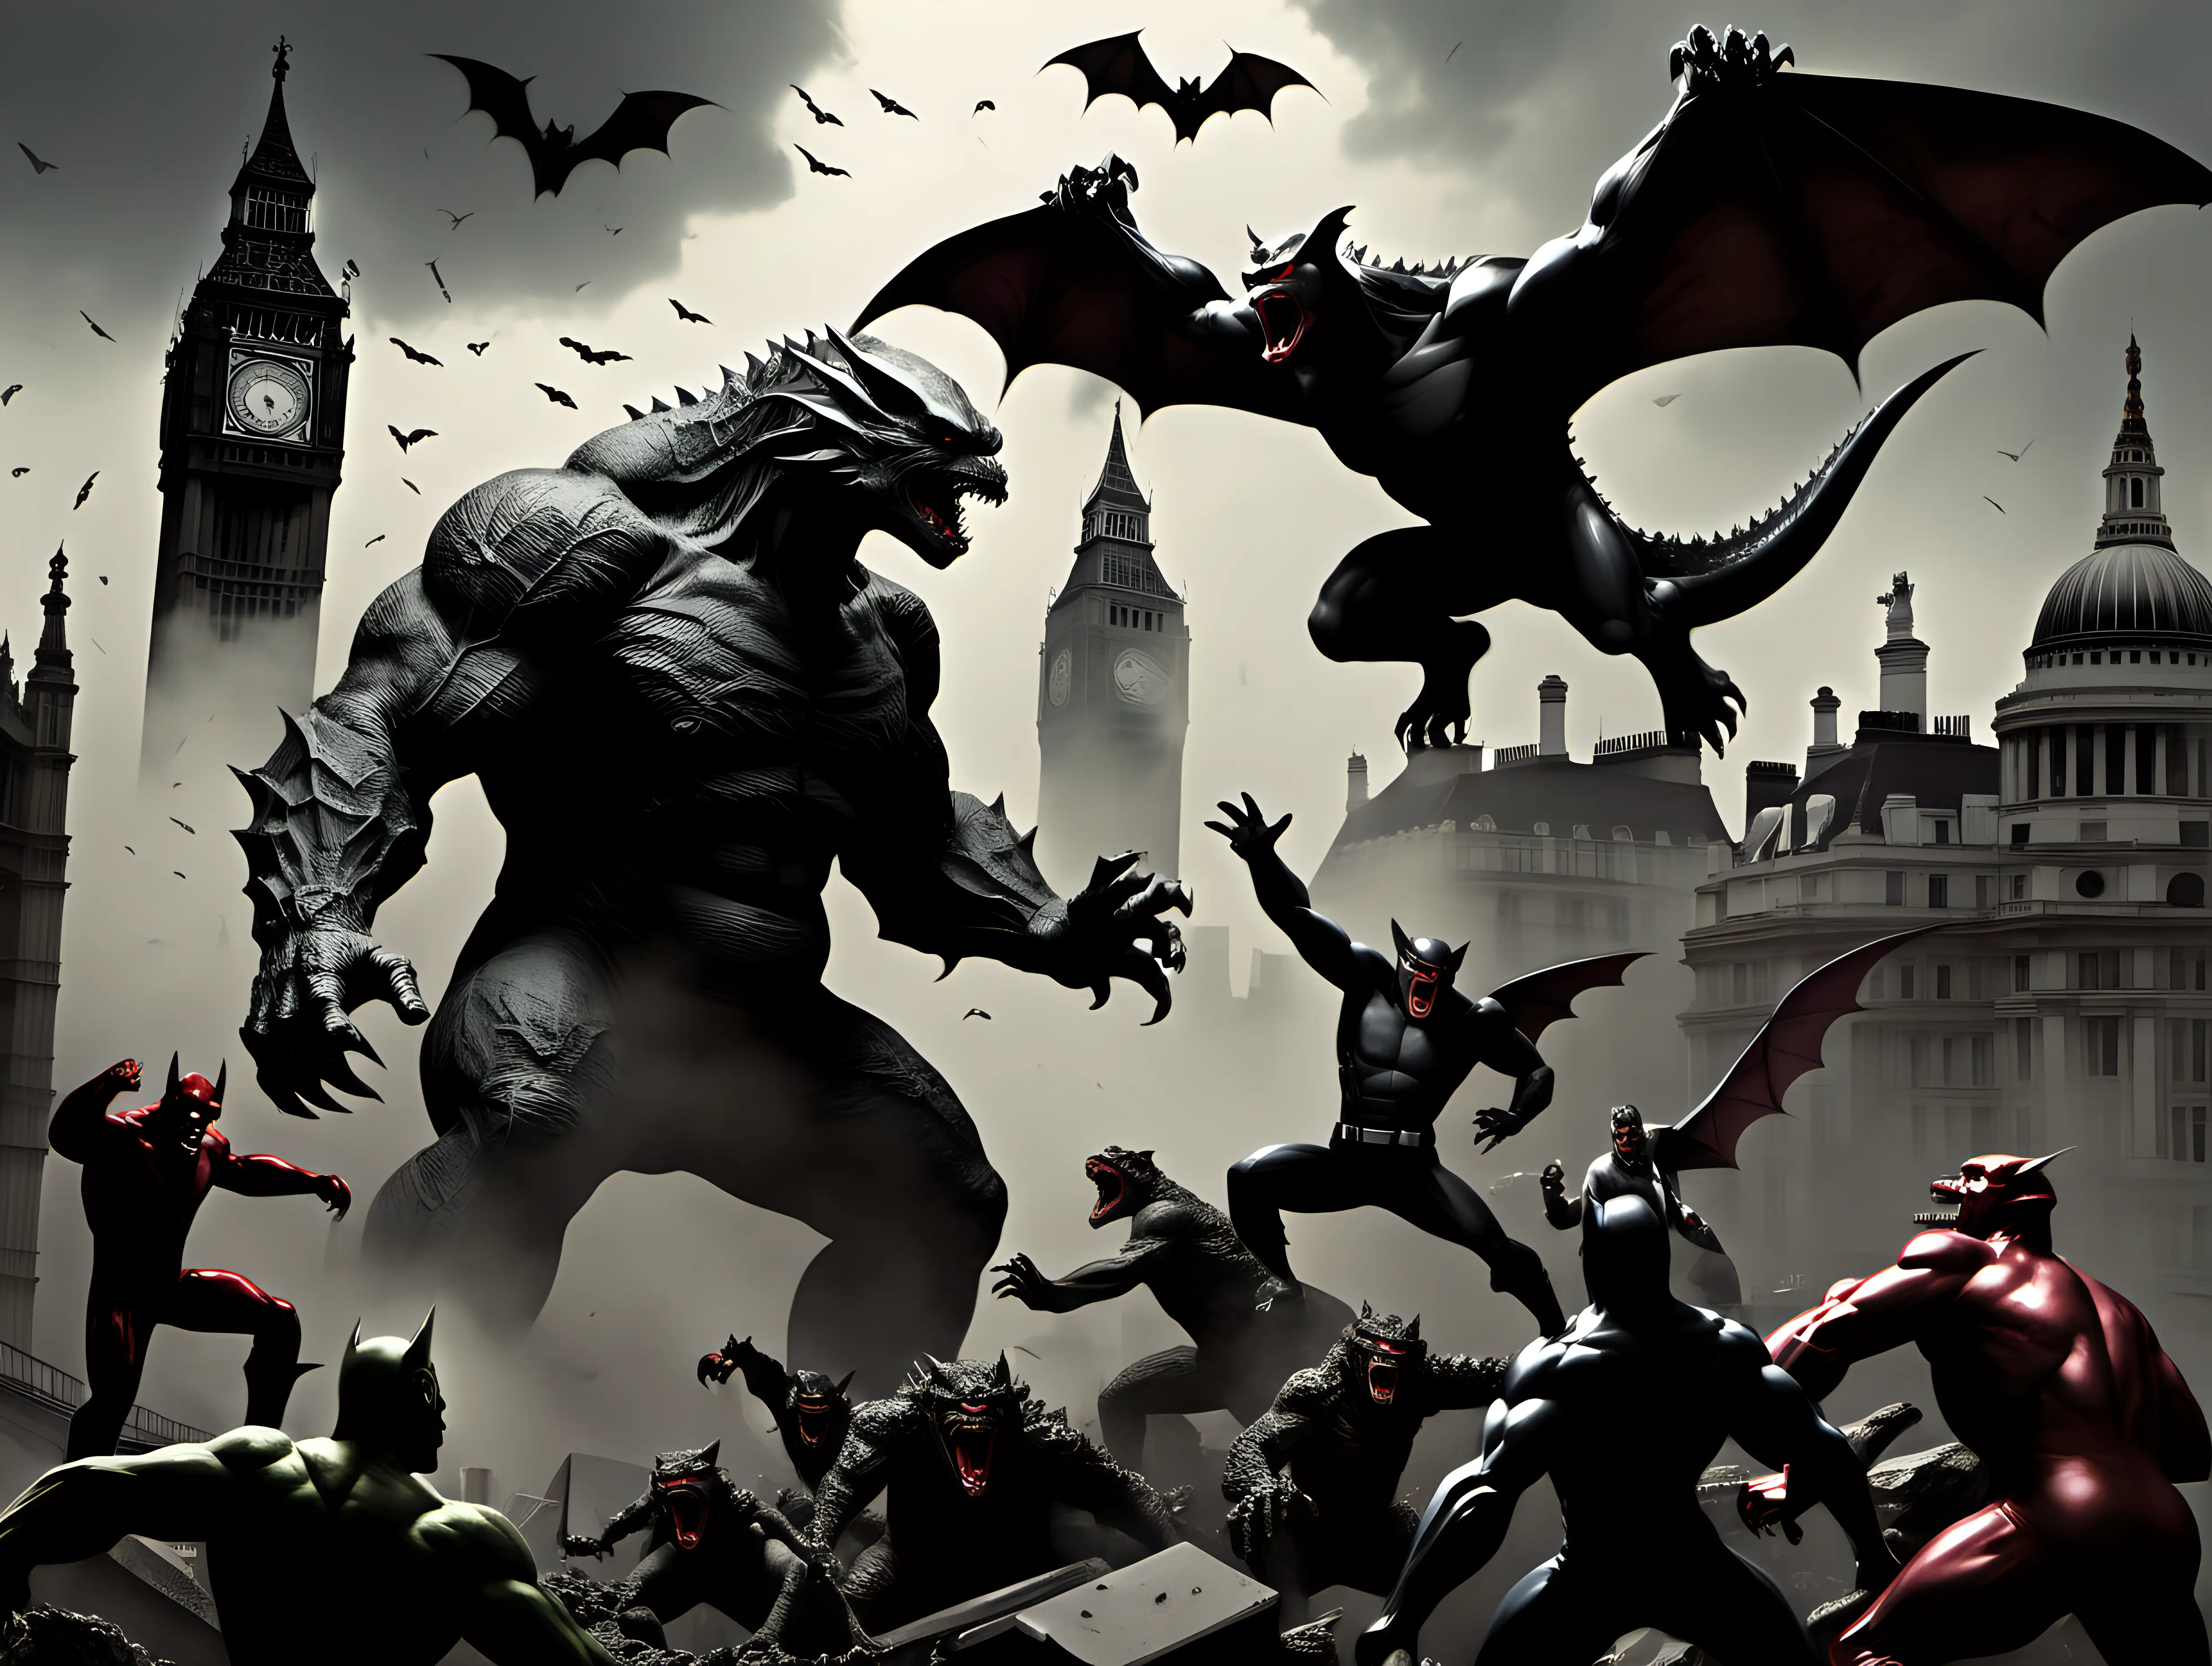 The Avengers vs  Godzilla and vampire bats in the middle of London Frank Frazetta style